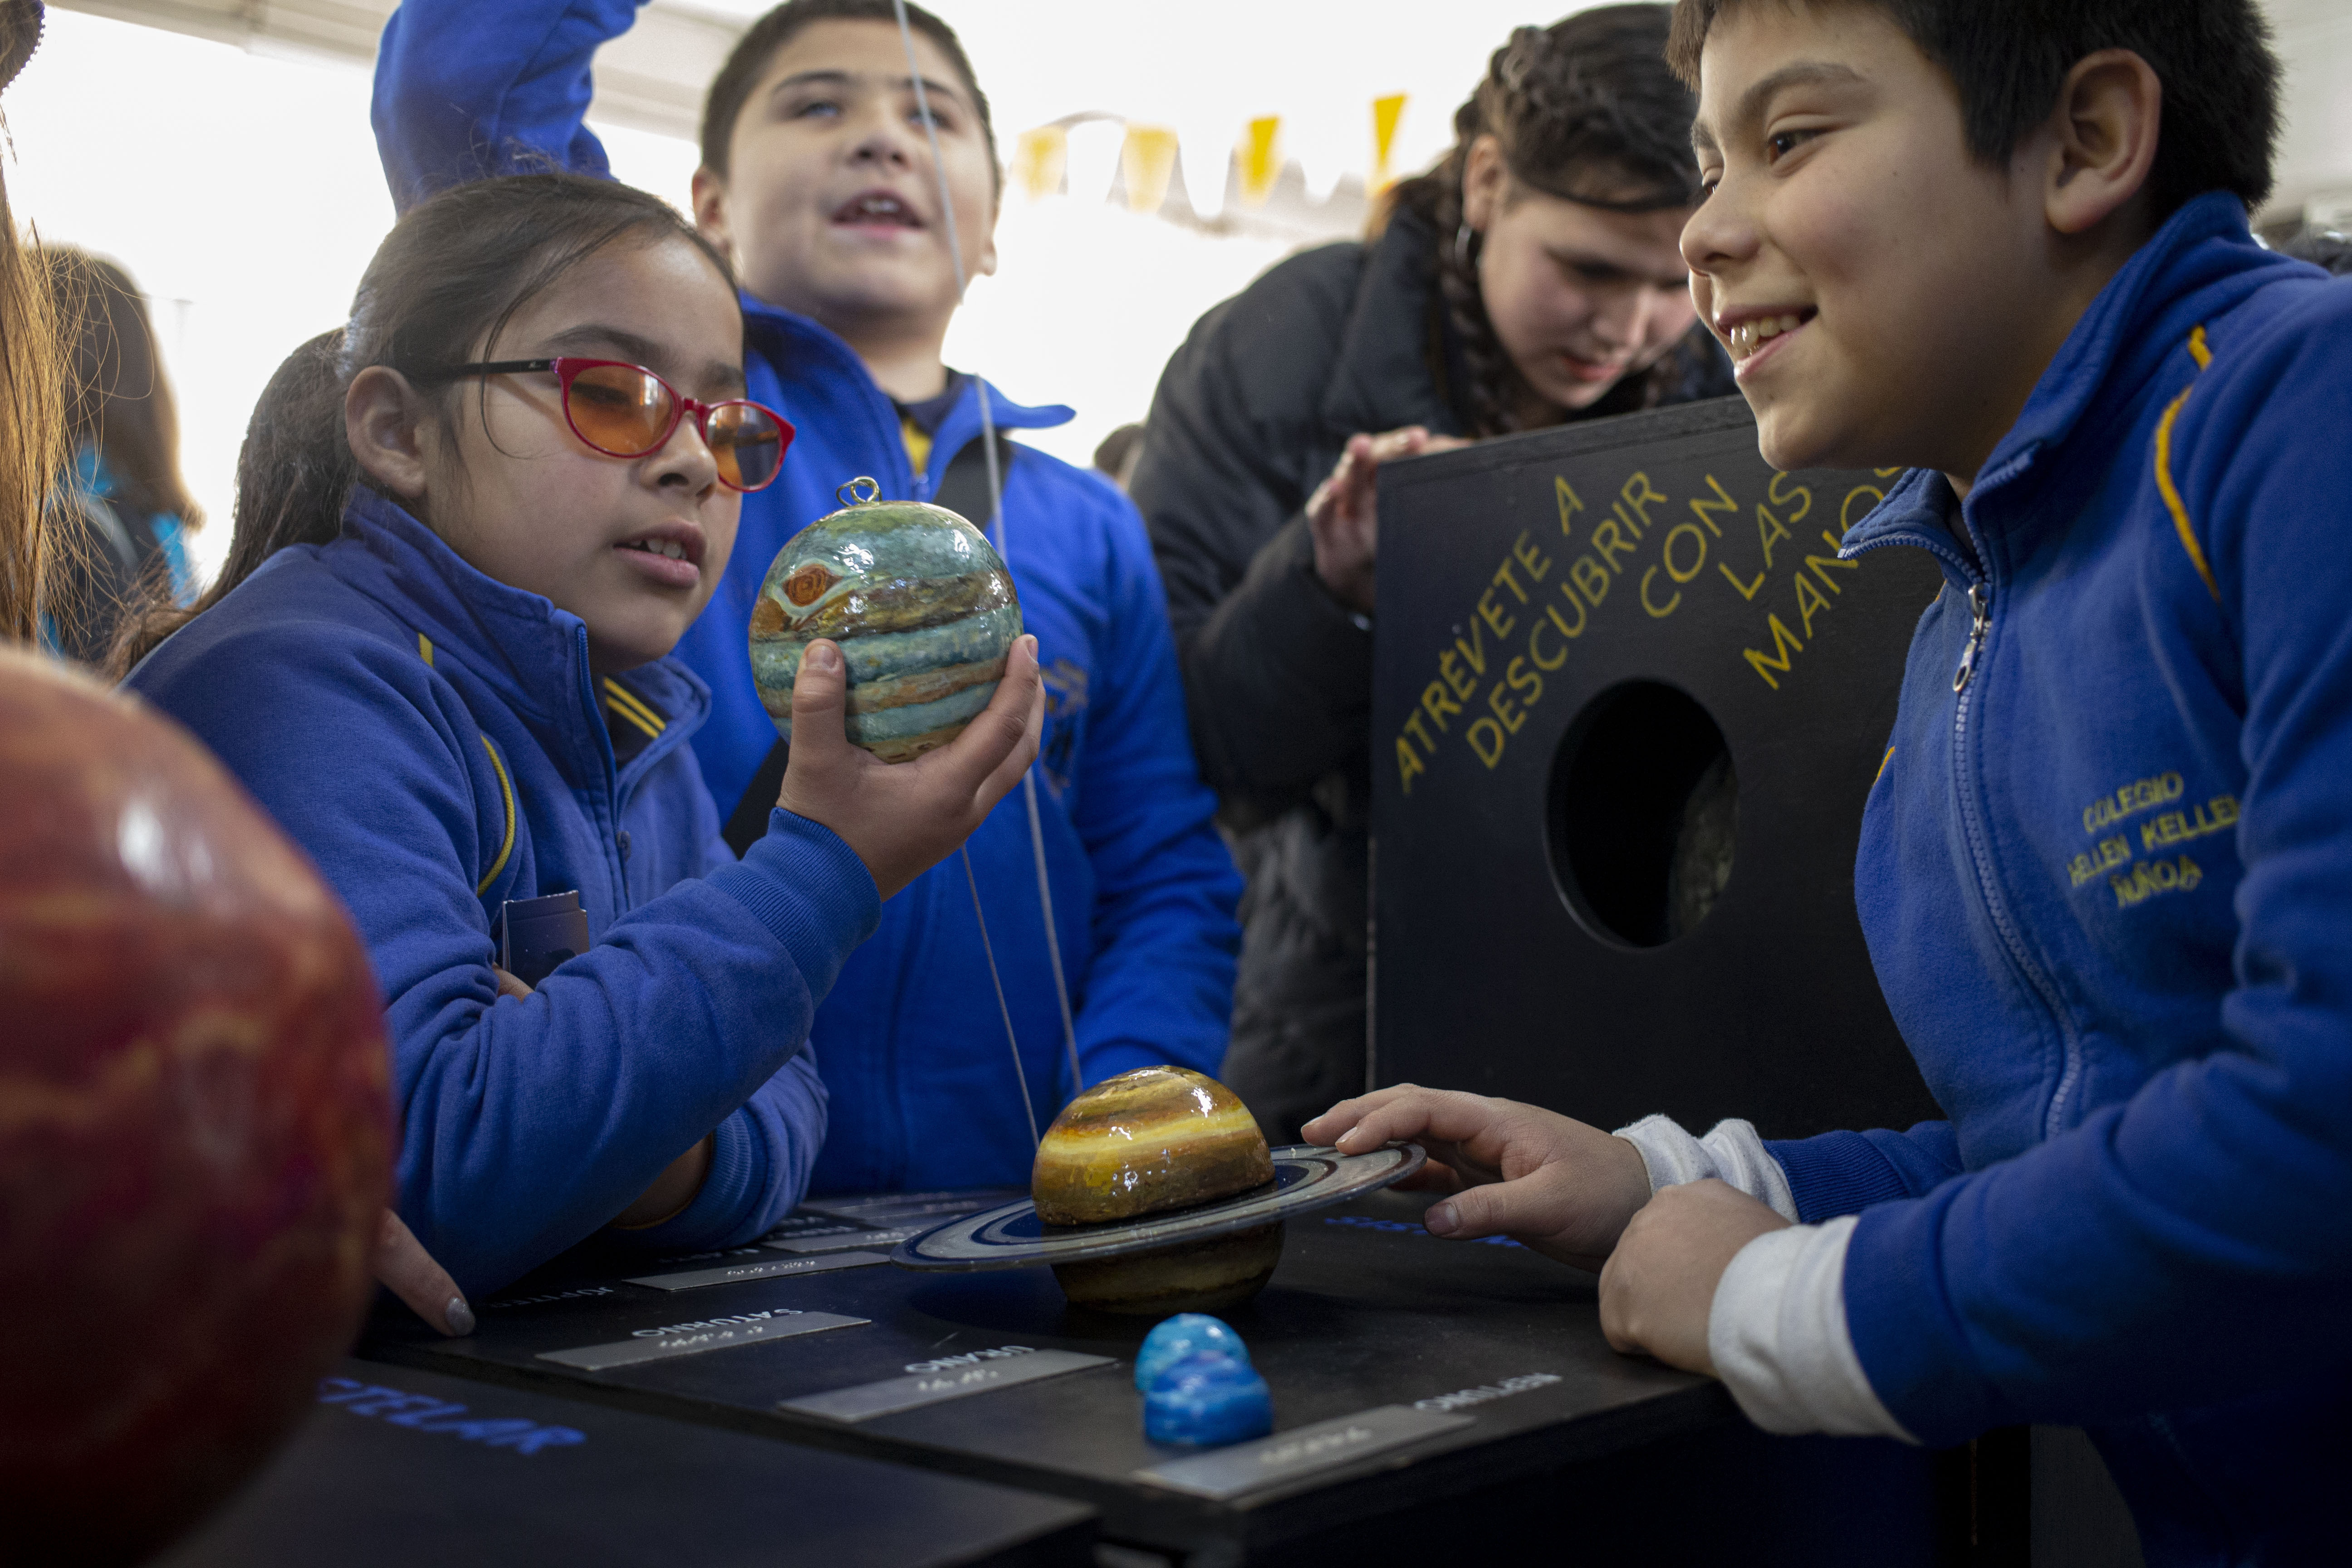 CORRECTS NAME OF UNIVERSITY - Blind school children take part in a sensorial experience with tools created by NASA and Edinboro University of Pennsylvania to experience an eclipse, during an event in the Helen Keller school in Santiago, Chile, Tuesday, June 25, 2019. The event comes exactly one week ahead of a total solar eclipse which is set to be fully visible in various South American countries, including Chile. (AP Photo/Esteban Felix)